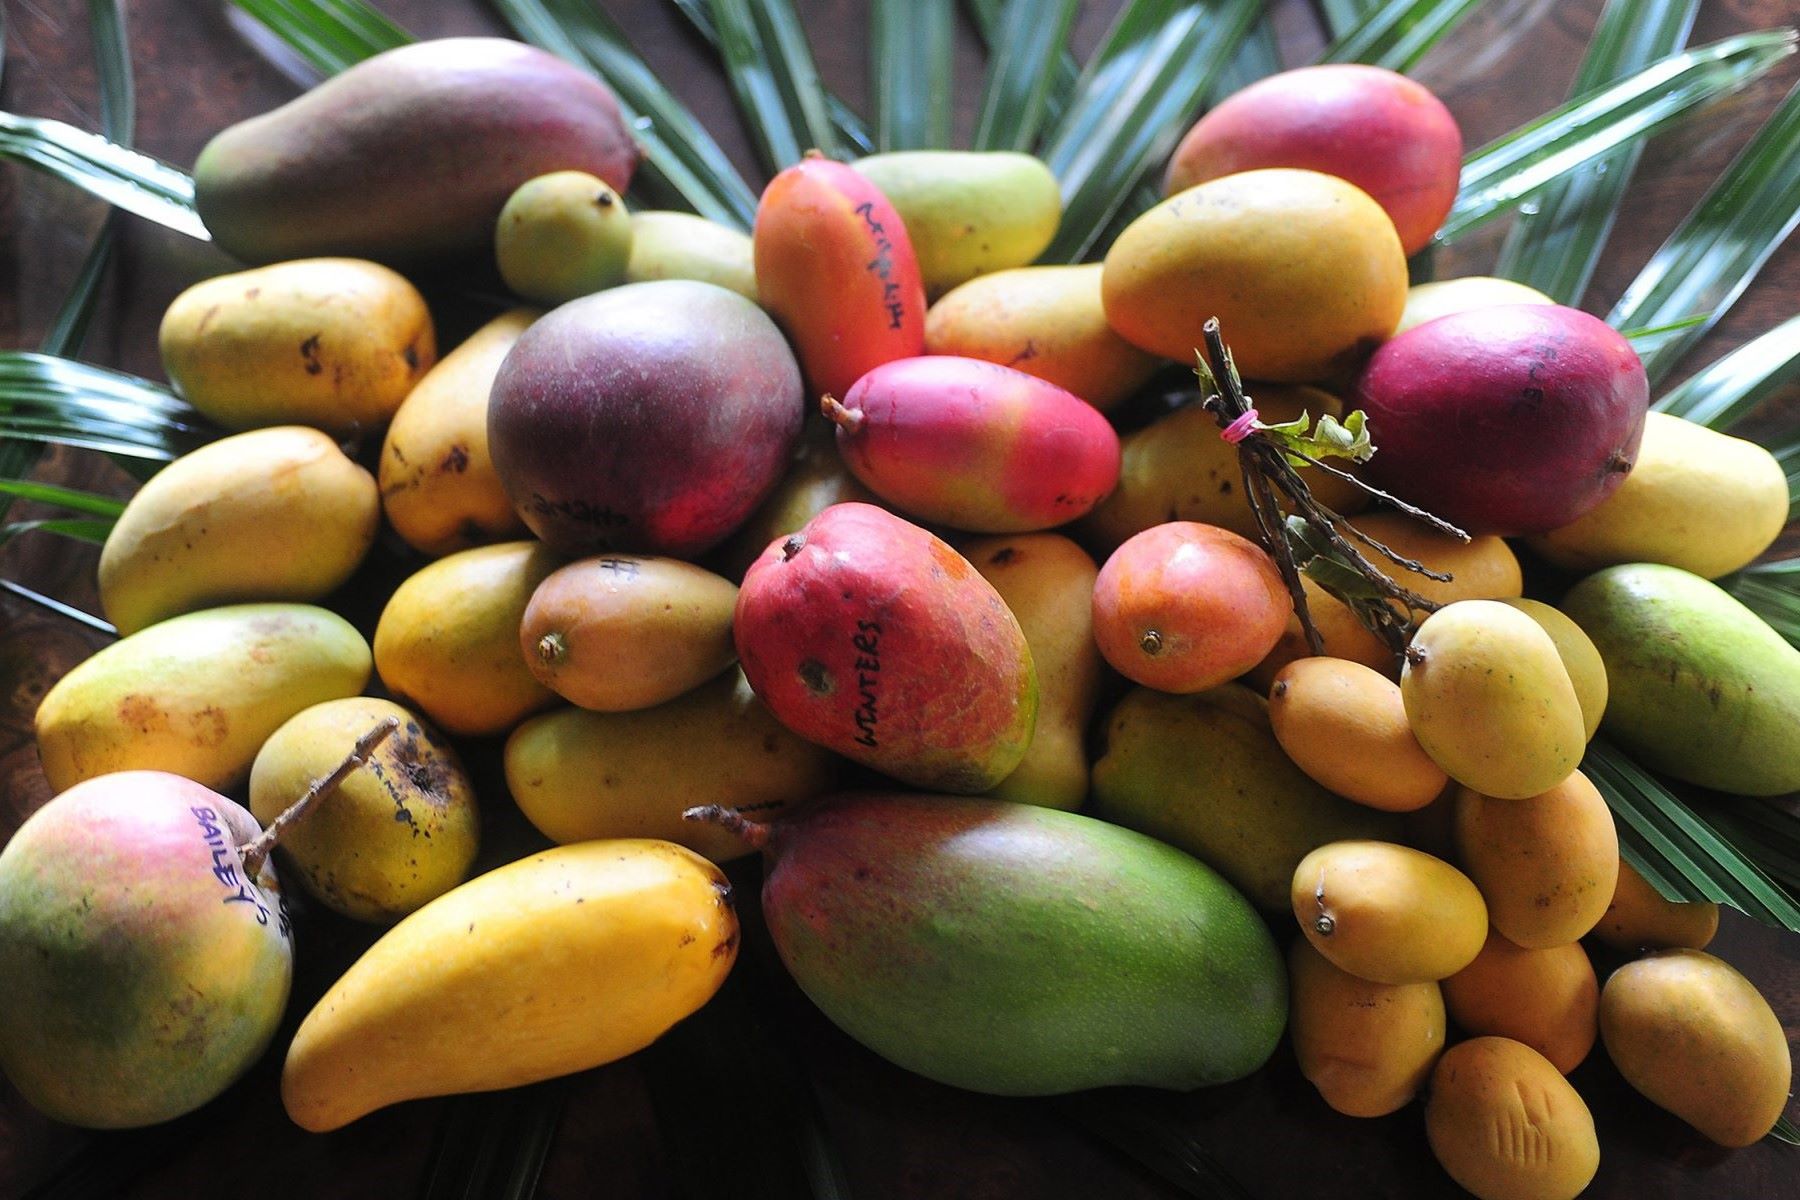 The Surprising Flavors Of Different Mango Varieties Revealed!